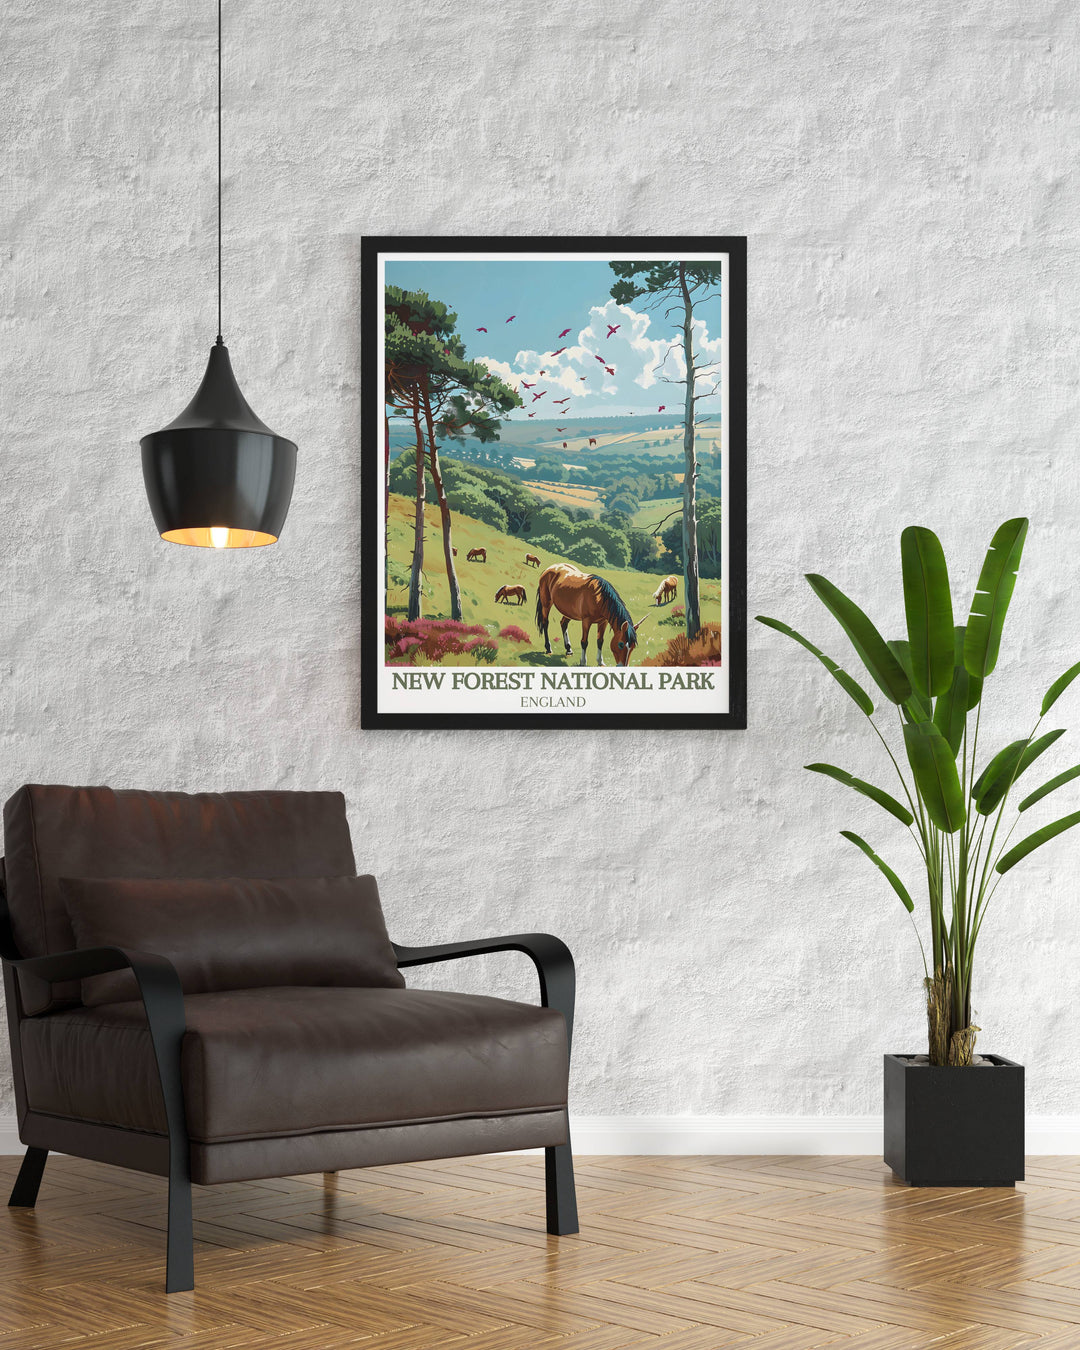 Canvas art of New Forest showcasing ponies in their natural setting, a splendid addition to any room seeking a natural aesthetic.